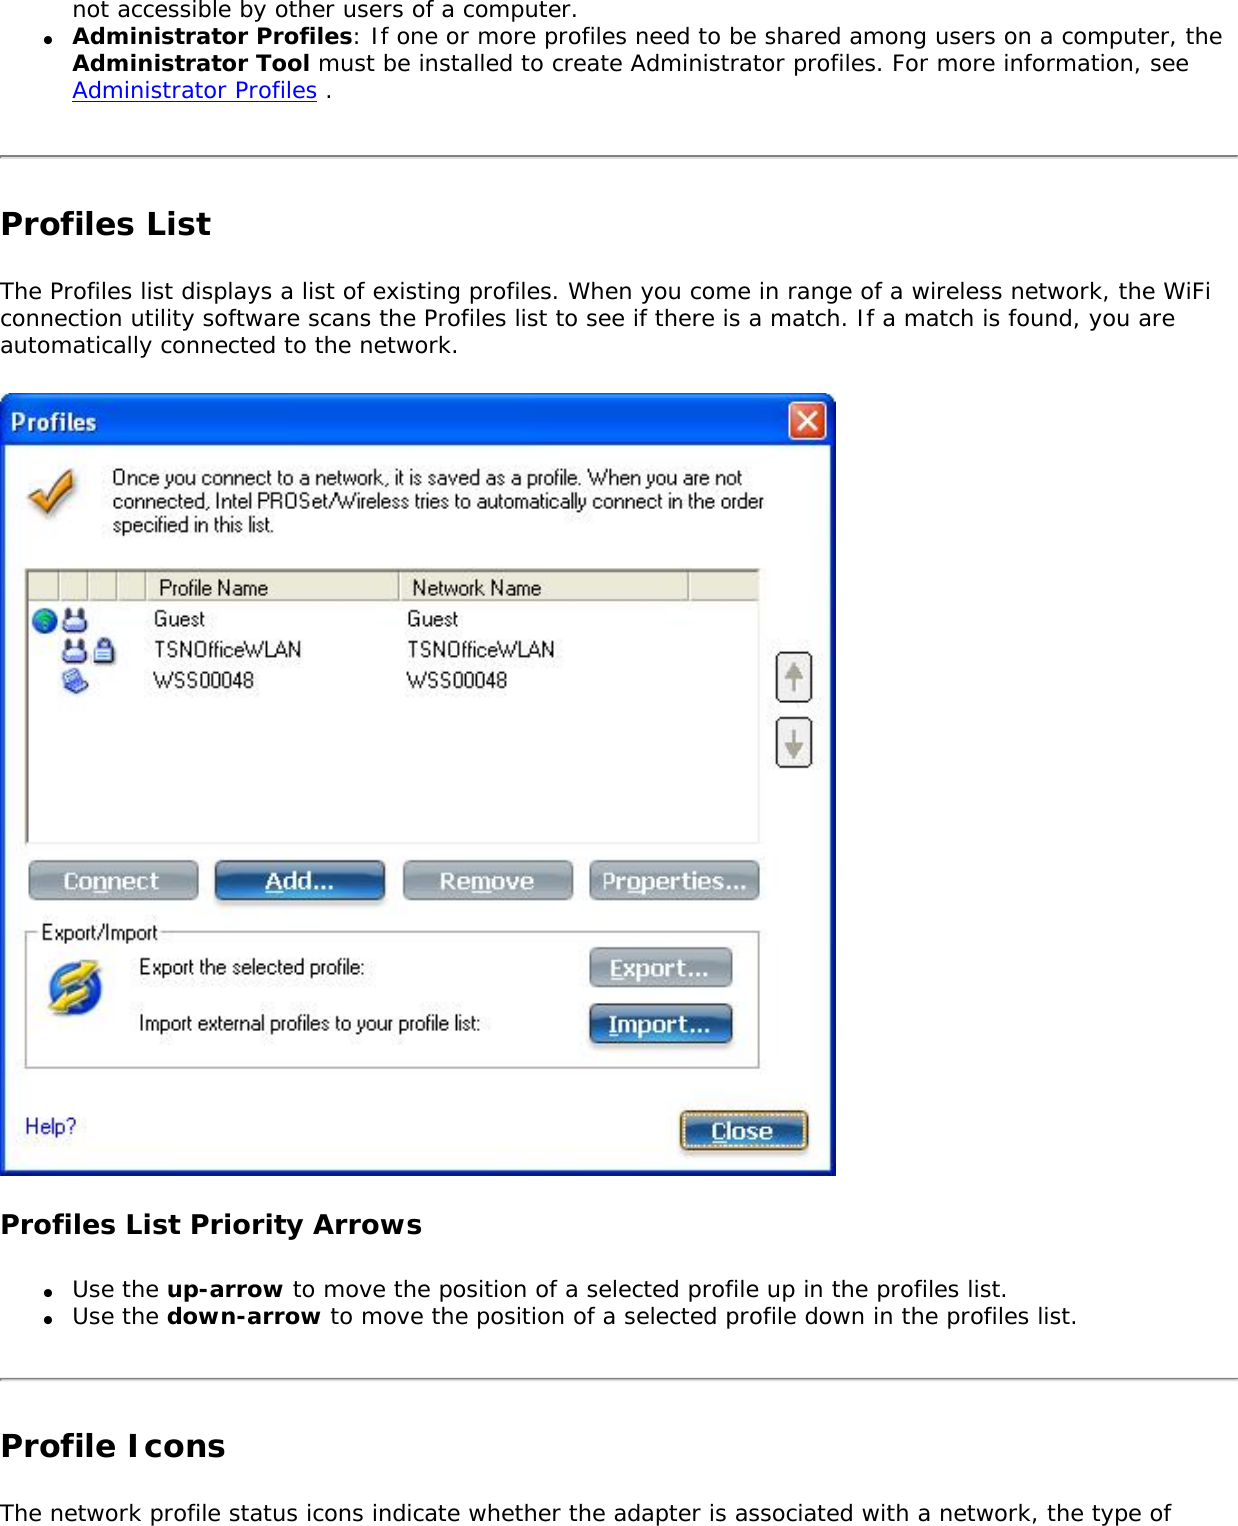 not accessible by other users of a computer. ●     Administrator Profiles: If one or more profiles need to be shared among users on a computer, the Administrator Tool must be installed to create Administrator profiles. For more information, see Administrator Profiles . Profiles ListThe Profiles list displays a list of existing profiles. When you come in range of a wireless network, the WiFi connection utility software scans the Profiles list to see if there is a match. If a match is found, you are automatically connected to the network. Profiles List Priority Arrows●     Use the up-arrow to move the position of a selected profile up in the profiles list.●     Use the down-arrow to move the position of a selected profile down in the profiles list.Profile IconsThe network profile status icons indicate whether the adapter is associated with a network, the type of 